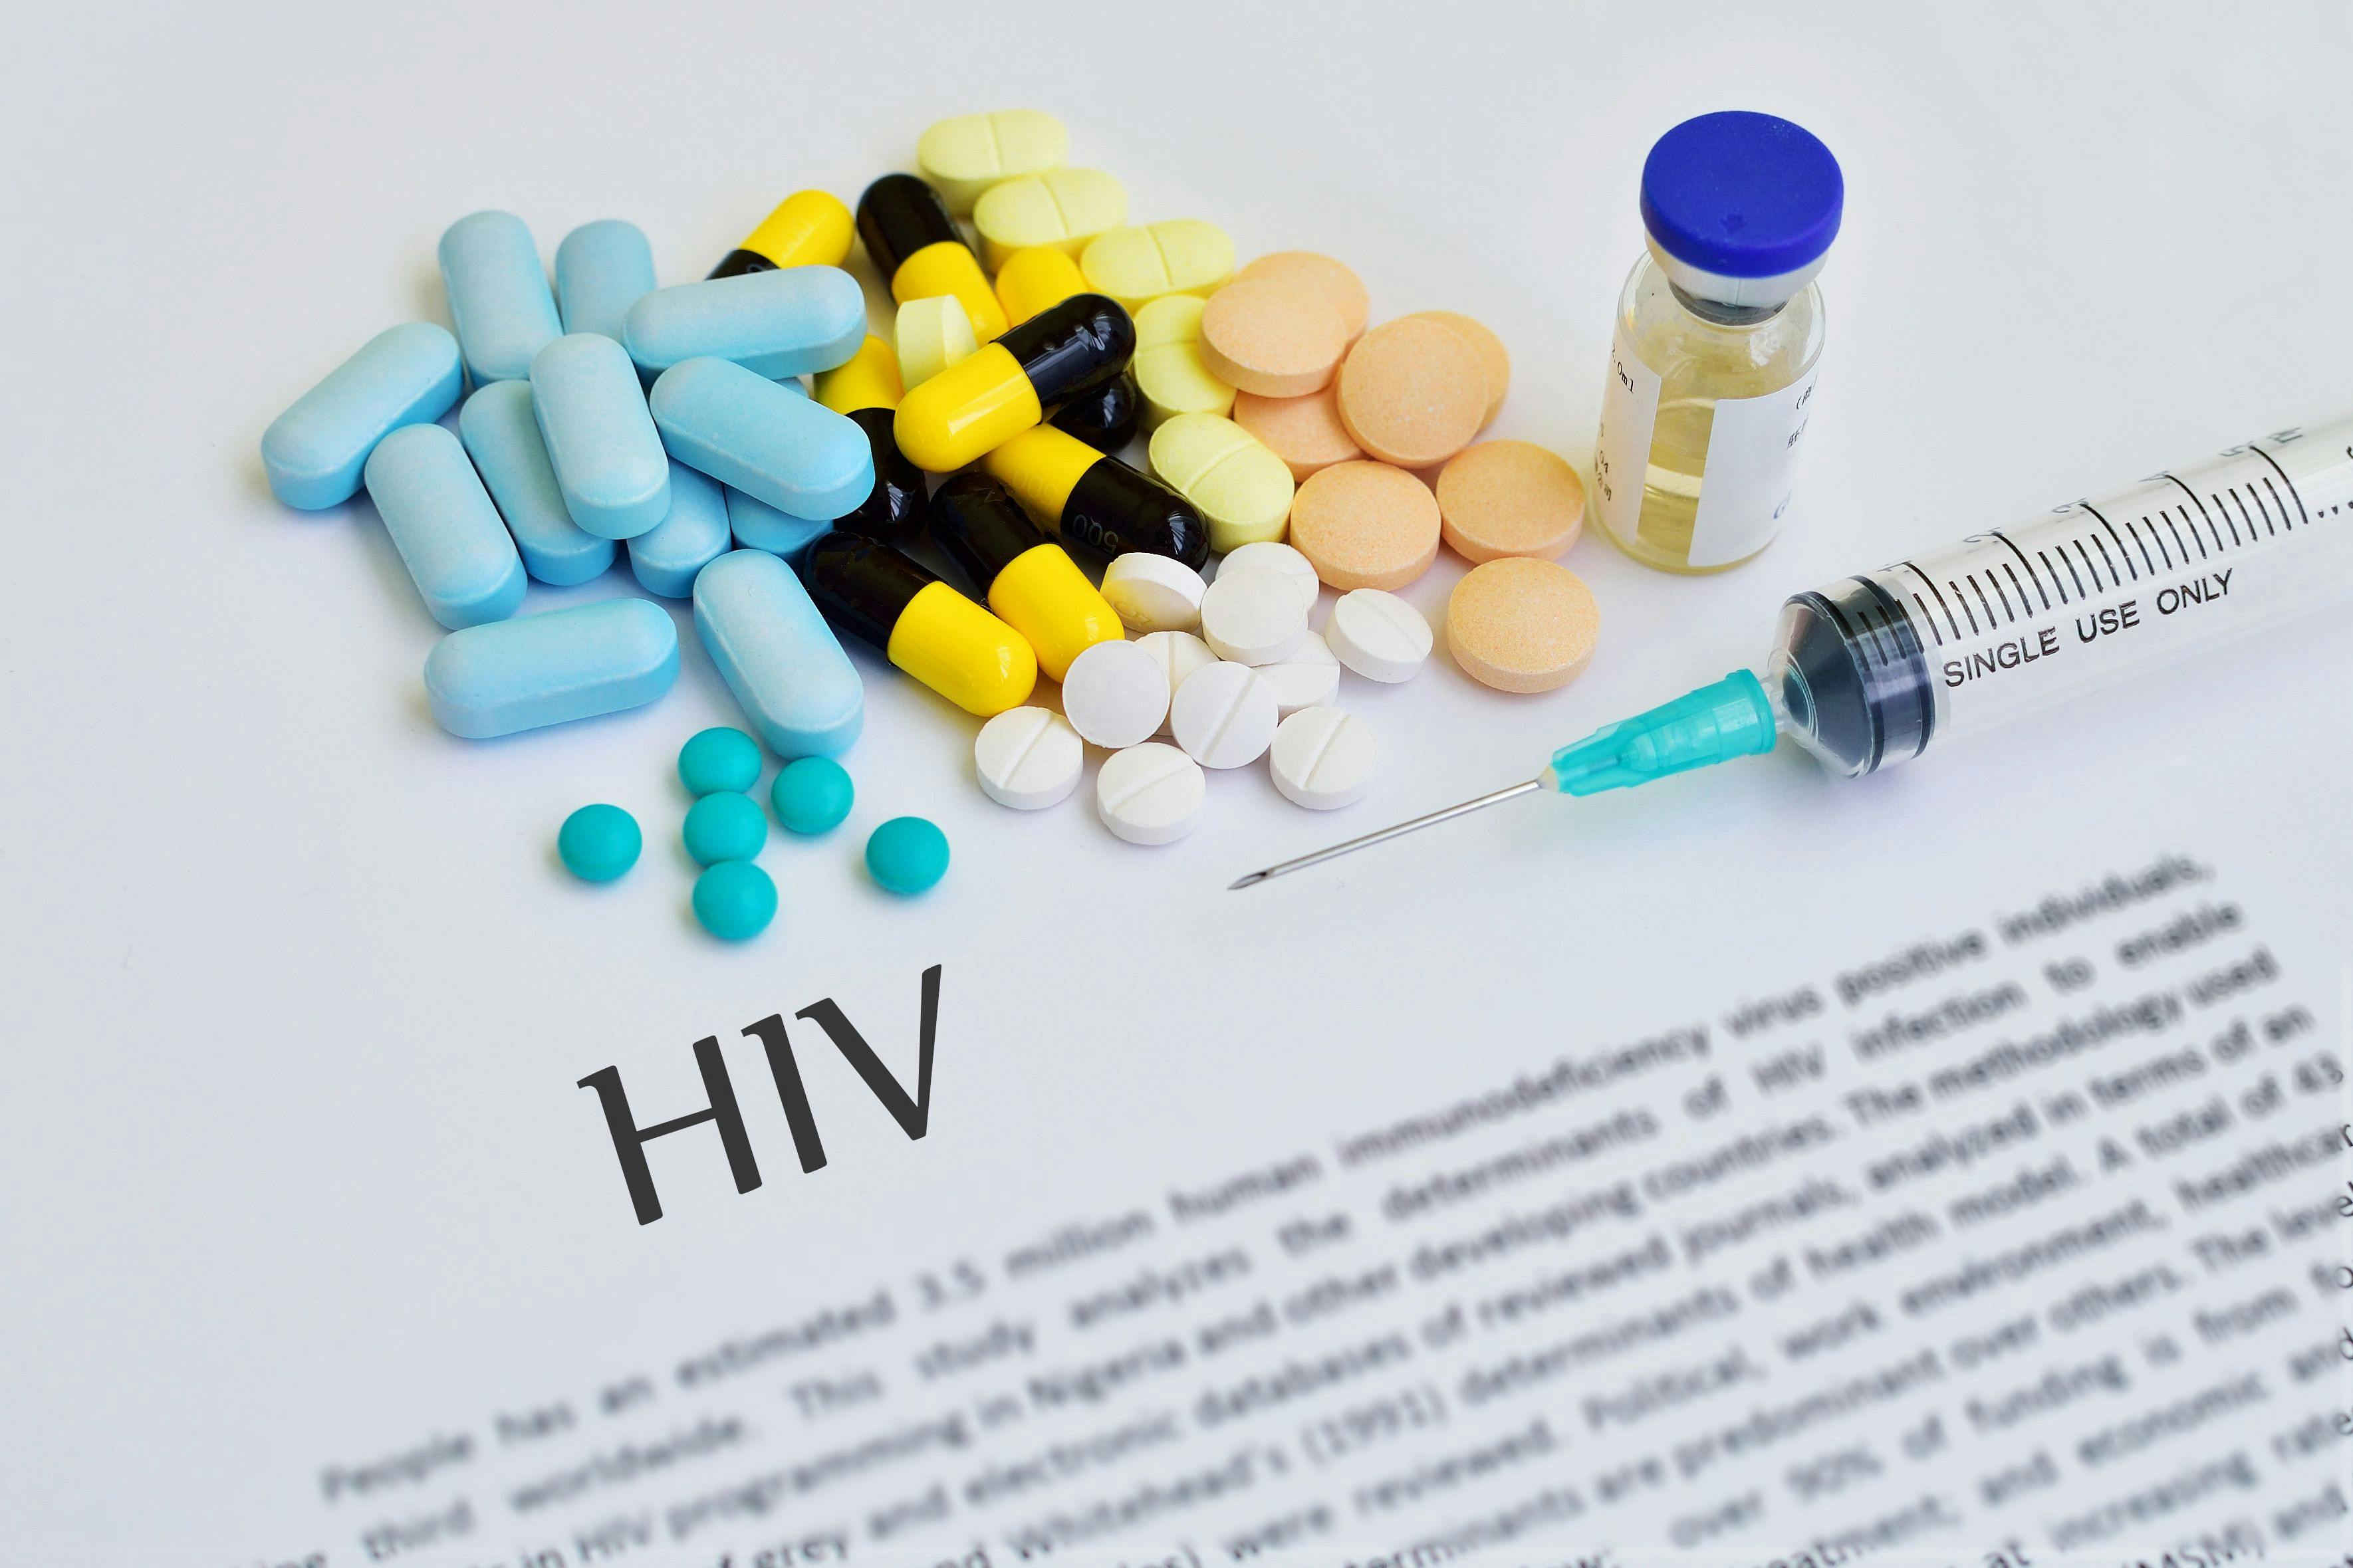 Despite a decrease in post-graduate training programs focused on HIV pharmacotherapy over the past decade, there is a growing need for HIV-specialized pharmacists to aid in ending the HIV epidemic, especially in the era of long-acting injectables. Image Credit: © jarun011 - stock.adobe.com